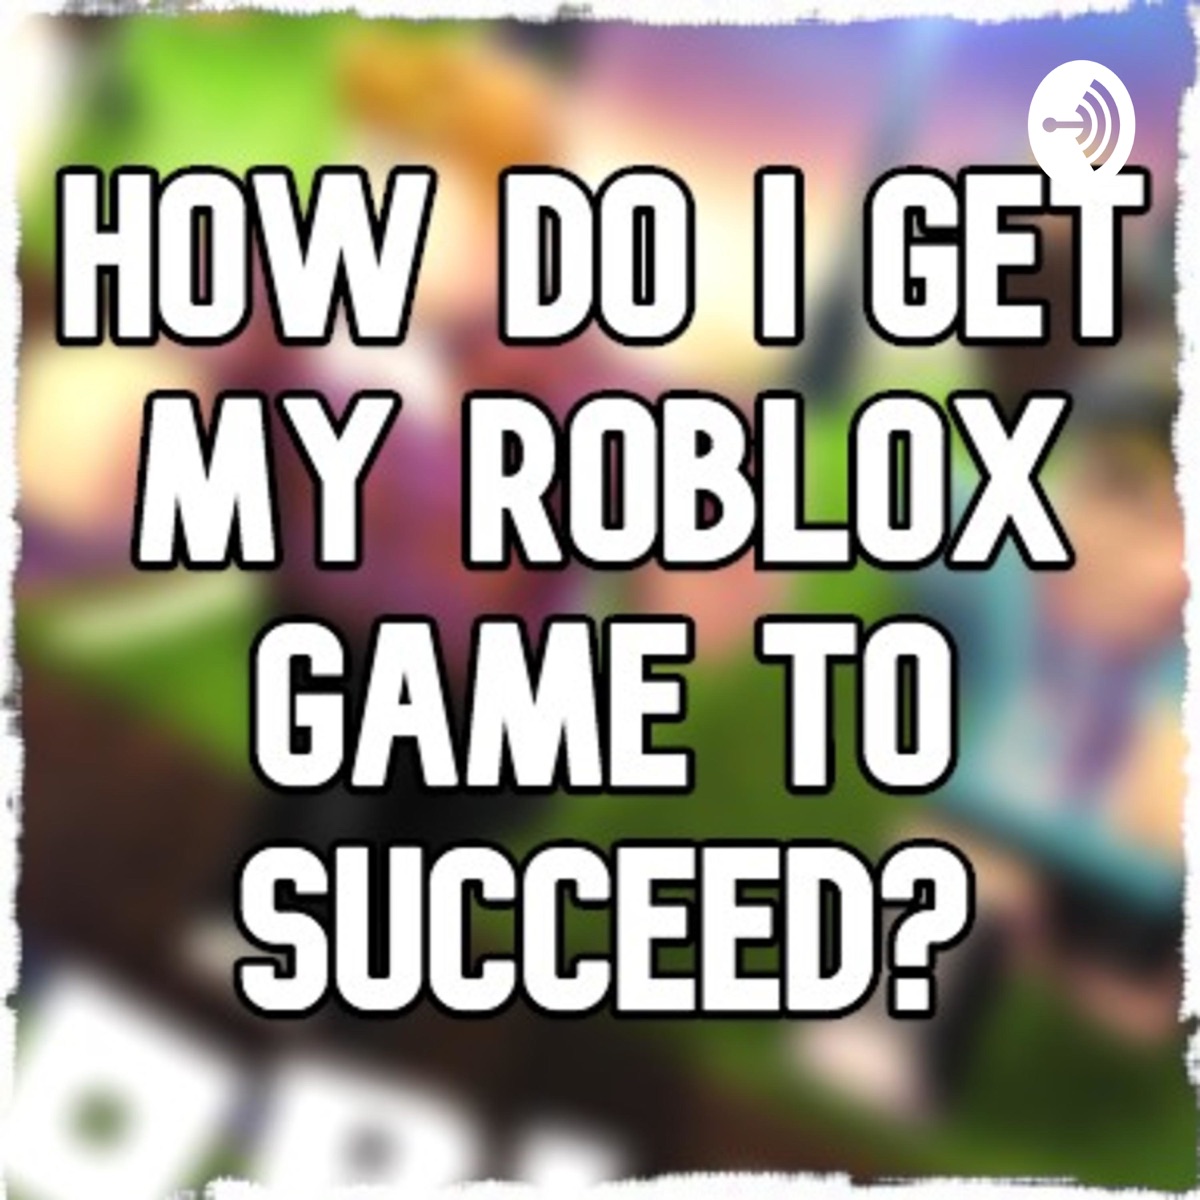 Related How Do I Make My Roblox Game Succeed Podcast Podtail - doctor who roblox scene roblox